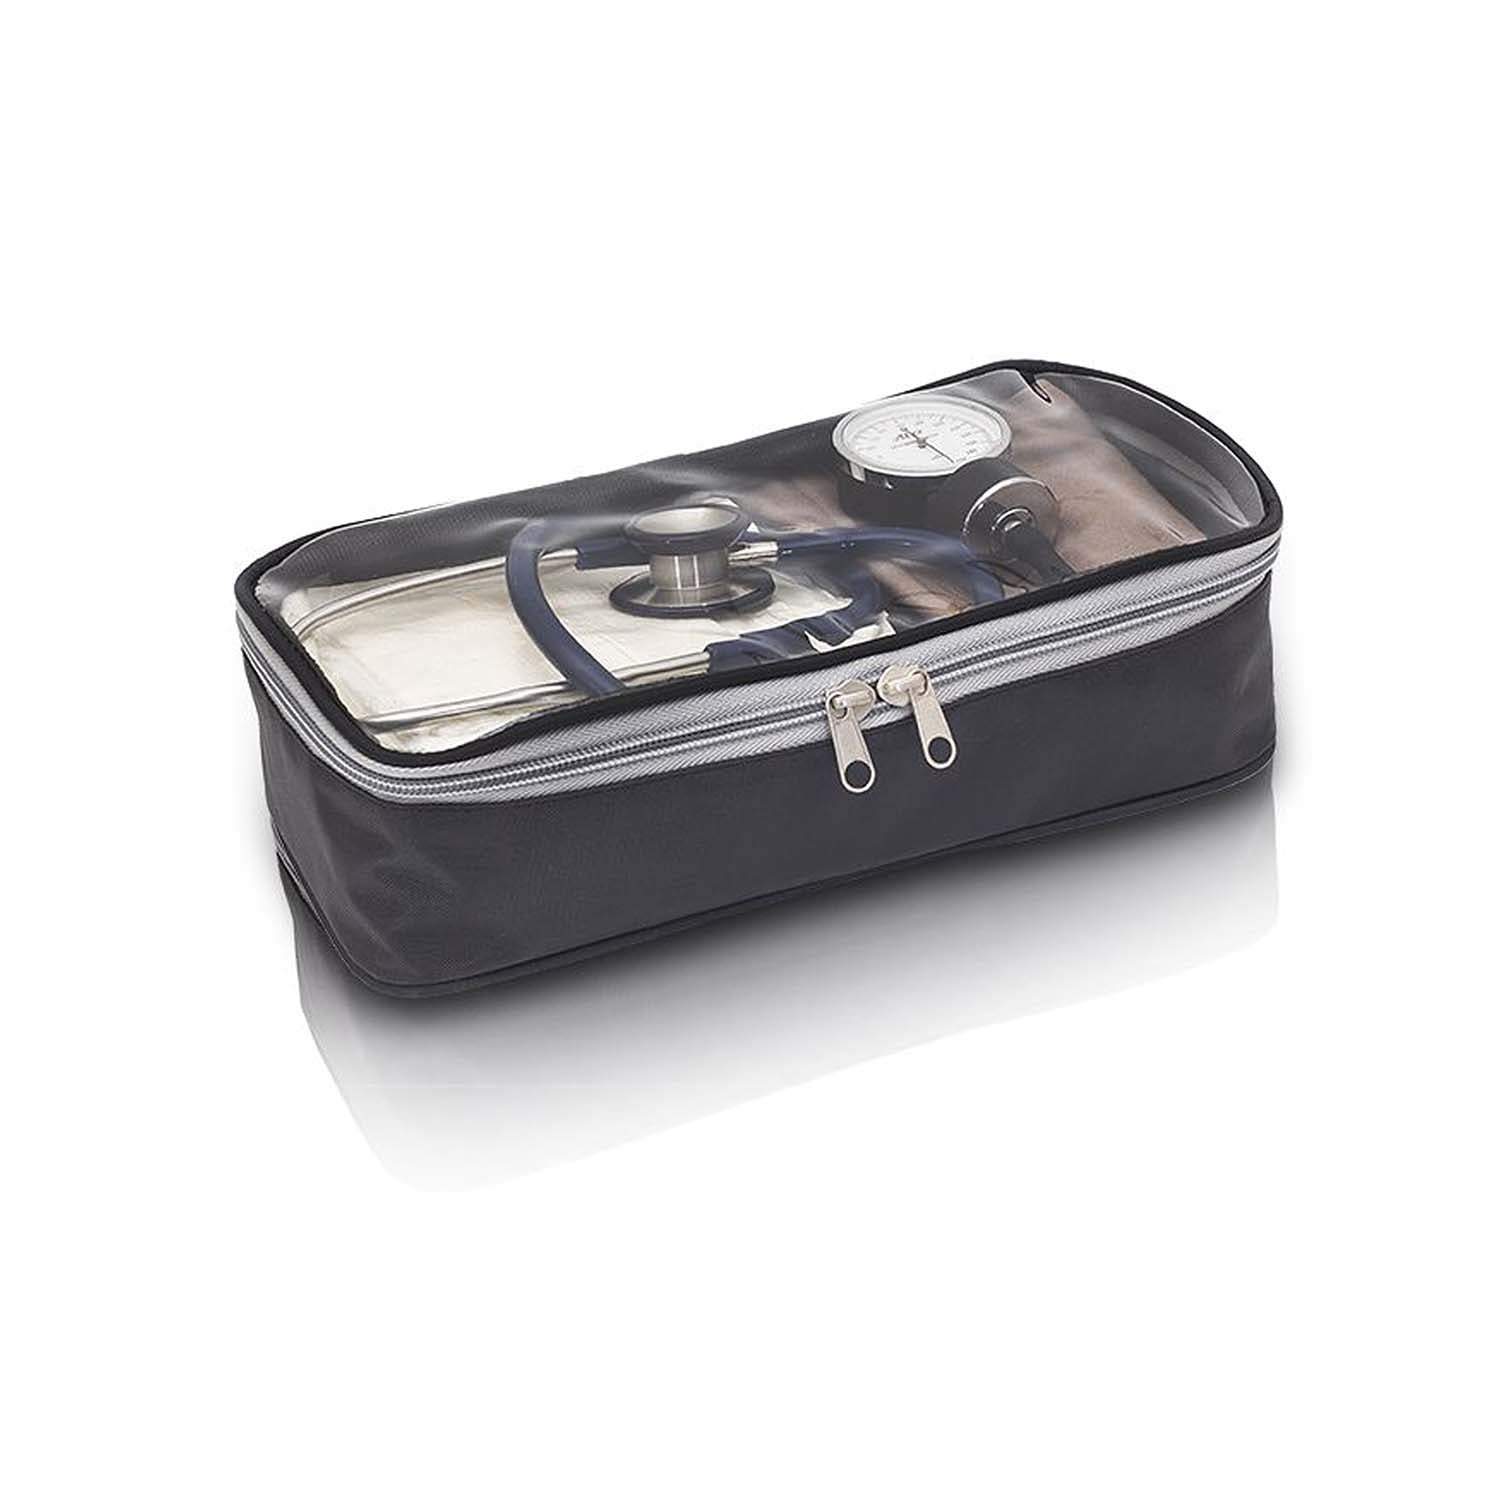 The Medical Assistance Briefcase | Black (PRACTI'S) (6)